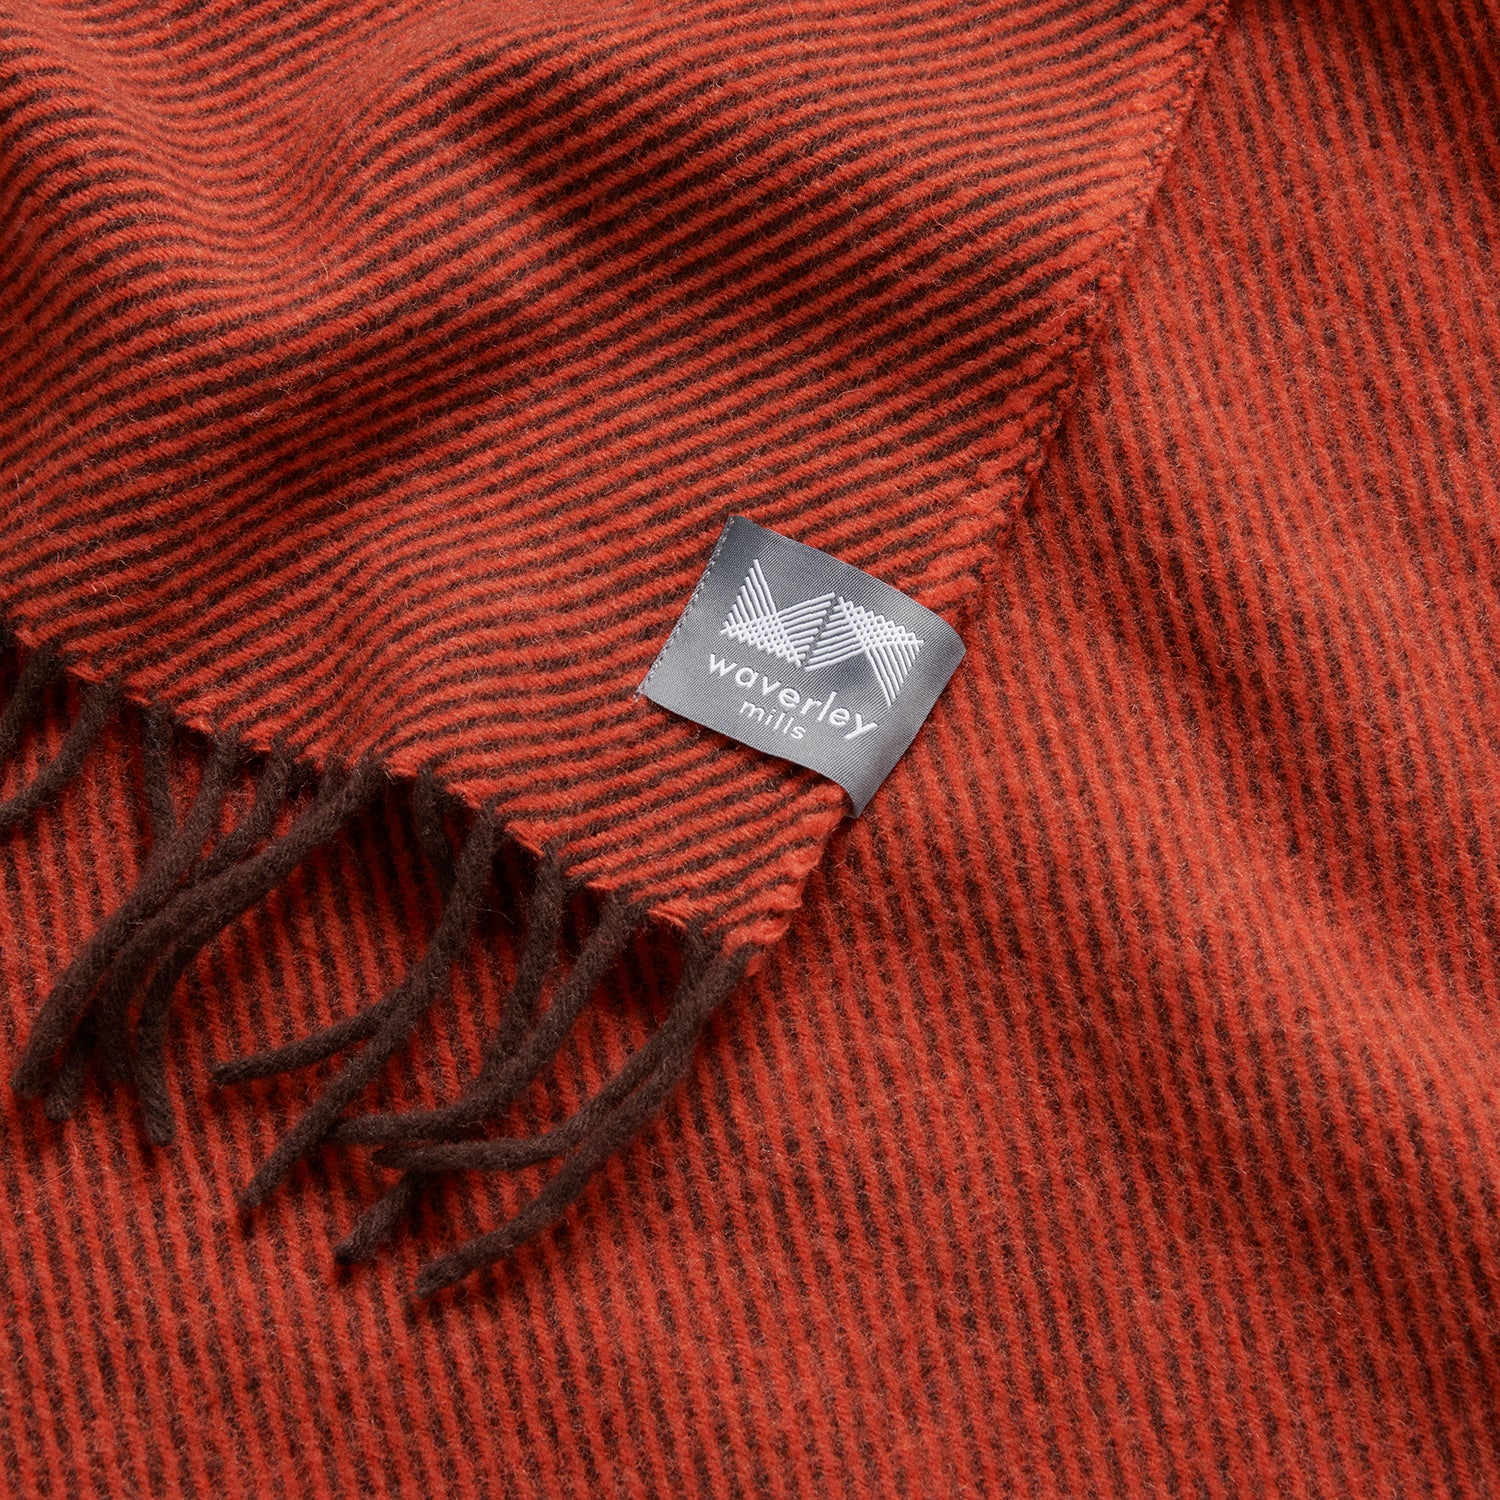 A close up of the diagonal throw in umber showing the contrast weave.